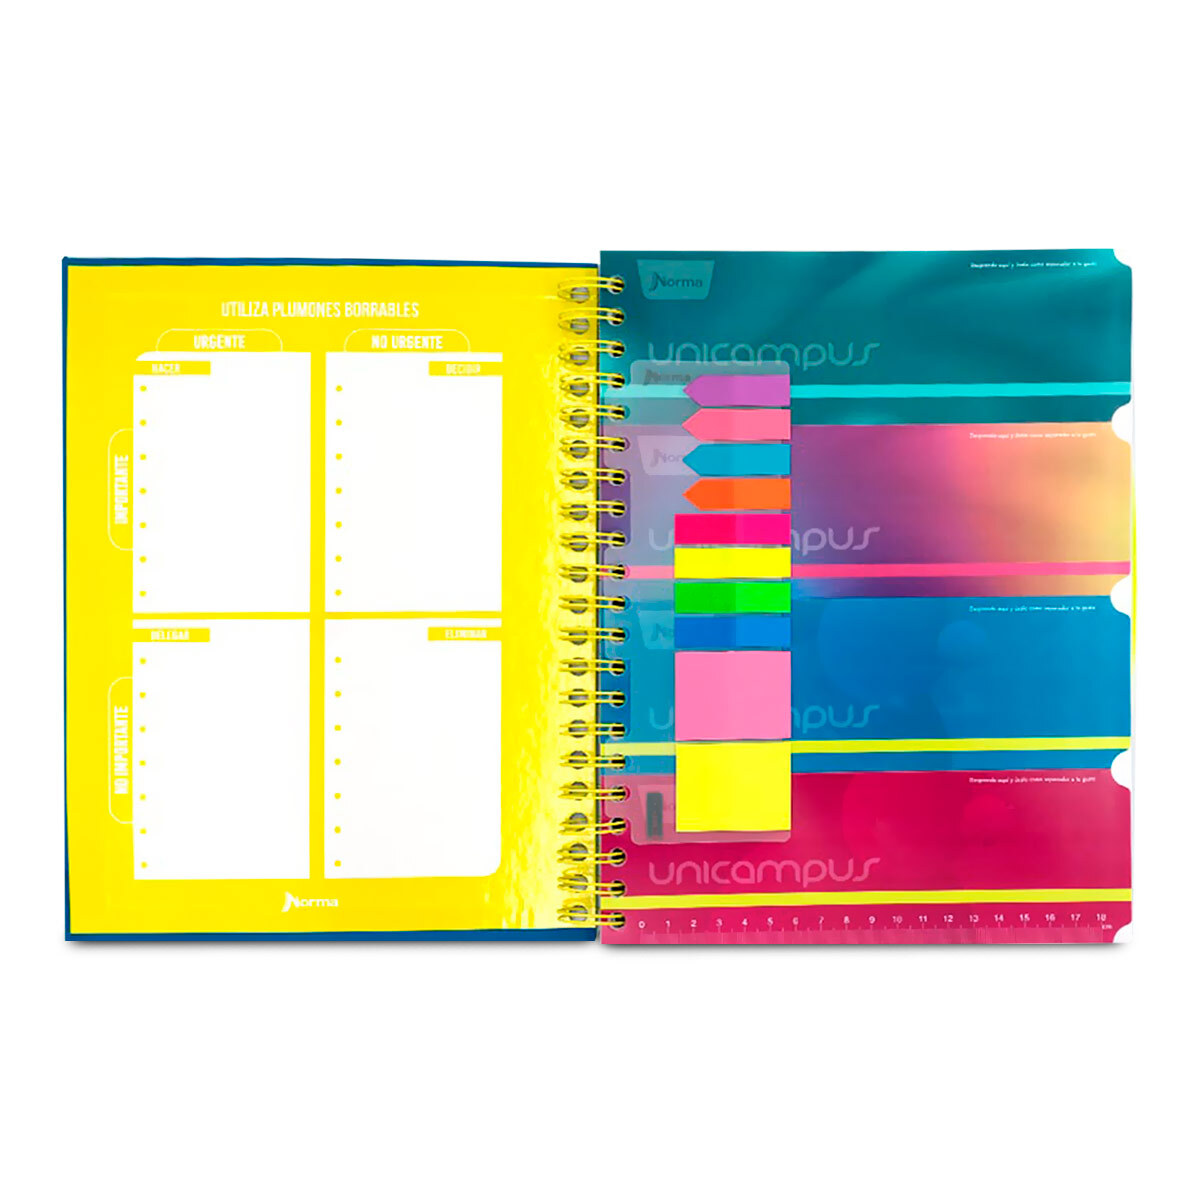 CUADERNO PROFESIONAL NORMA UNICAMPUS (C7, 100 H.) | Office Depot Mexico